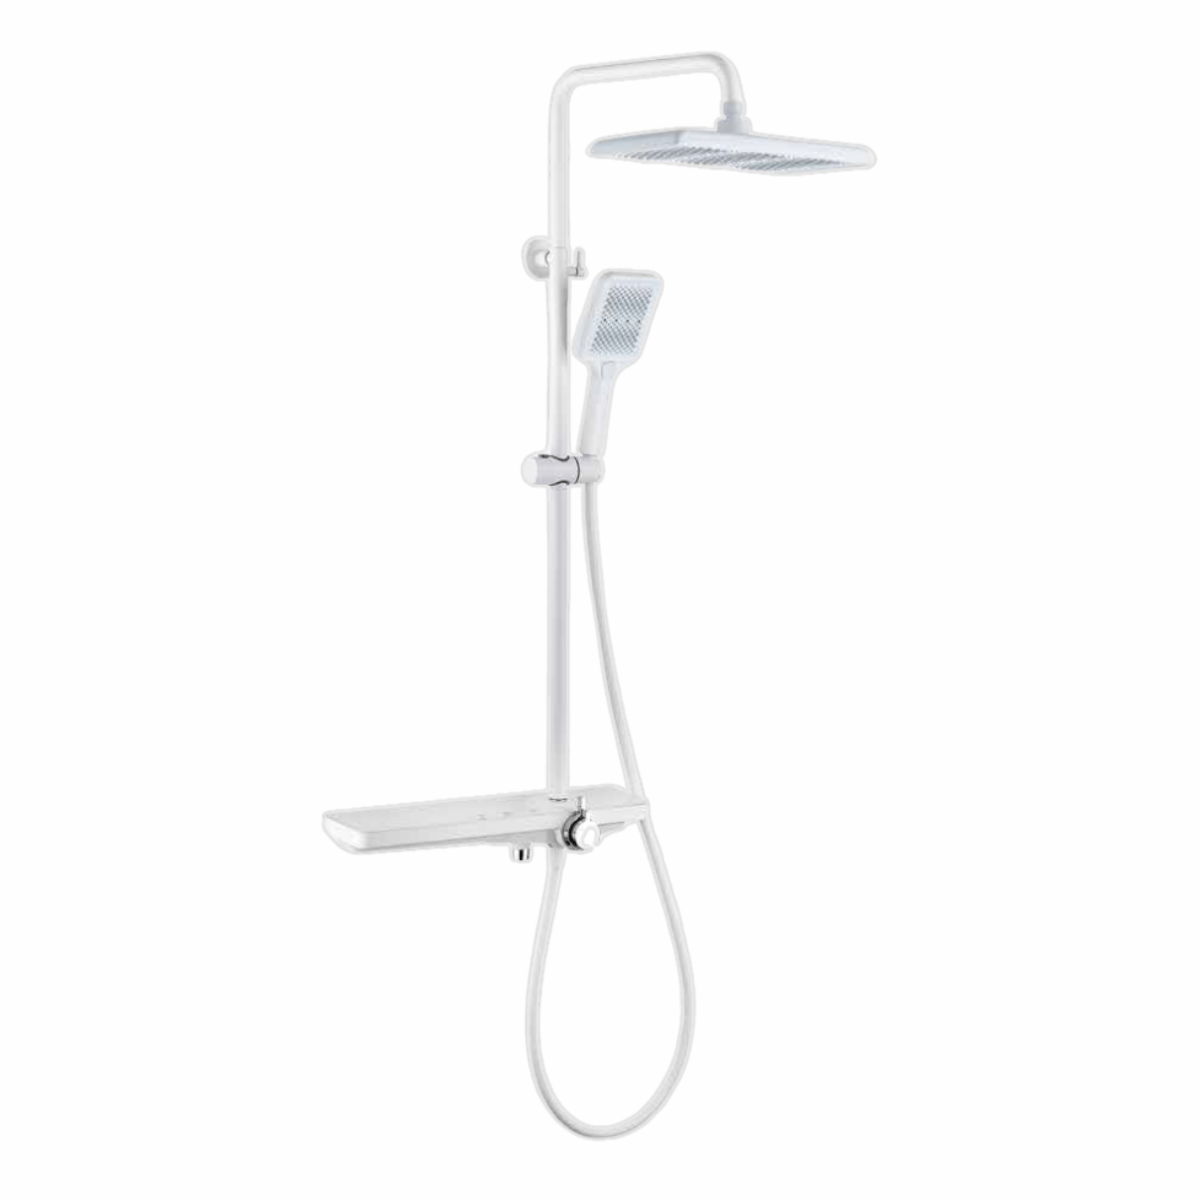 Buy WK Bathroom White Wall Mounted Three-Function Square Rain Shower Set - K-8857W | Shop at Supply Master Accra, Ghana Shower Set Buy Tools hardware Building materials